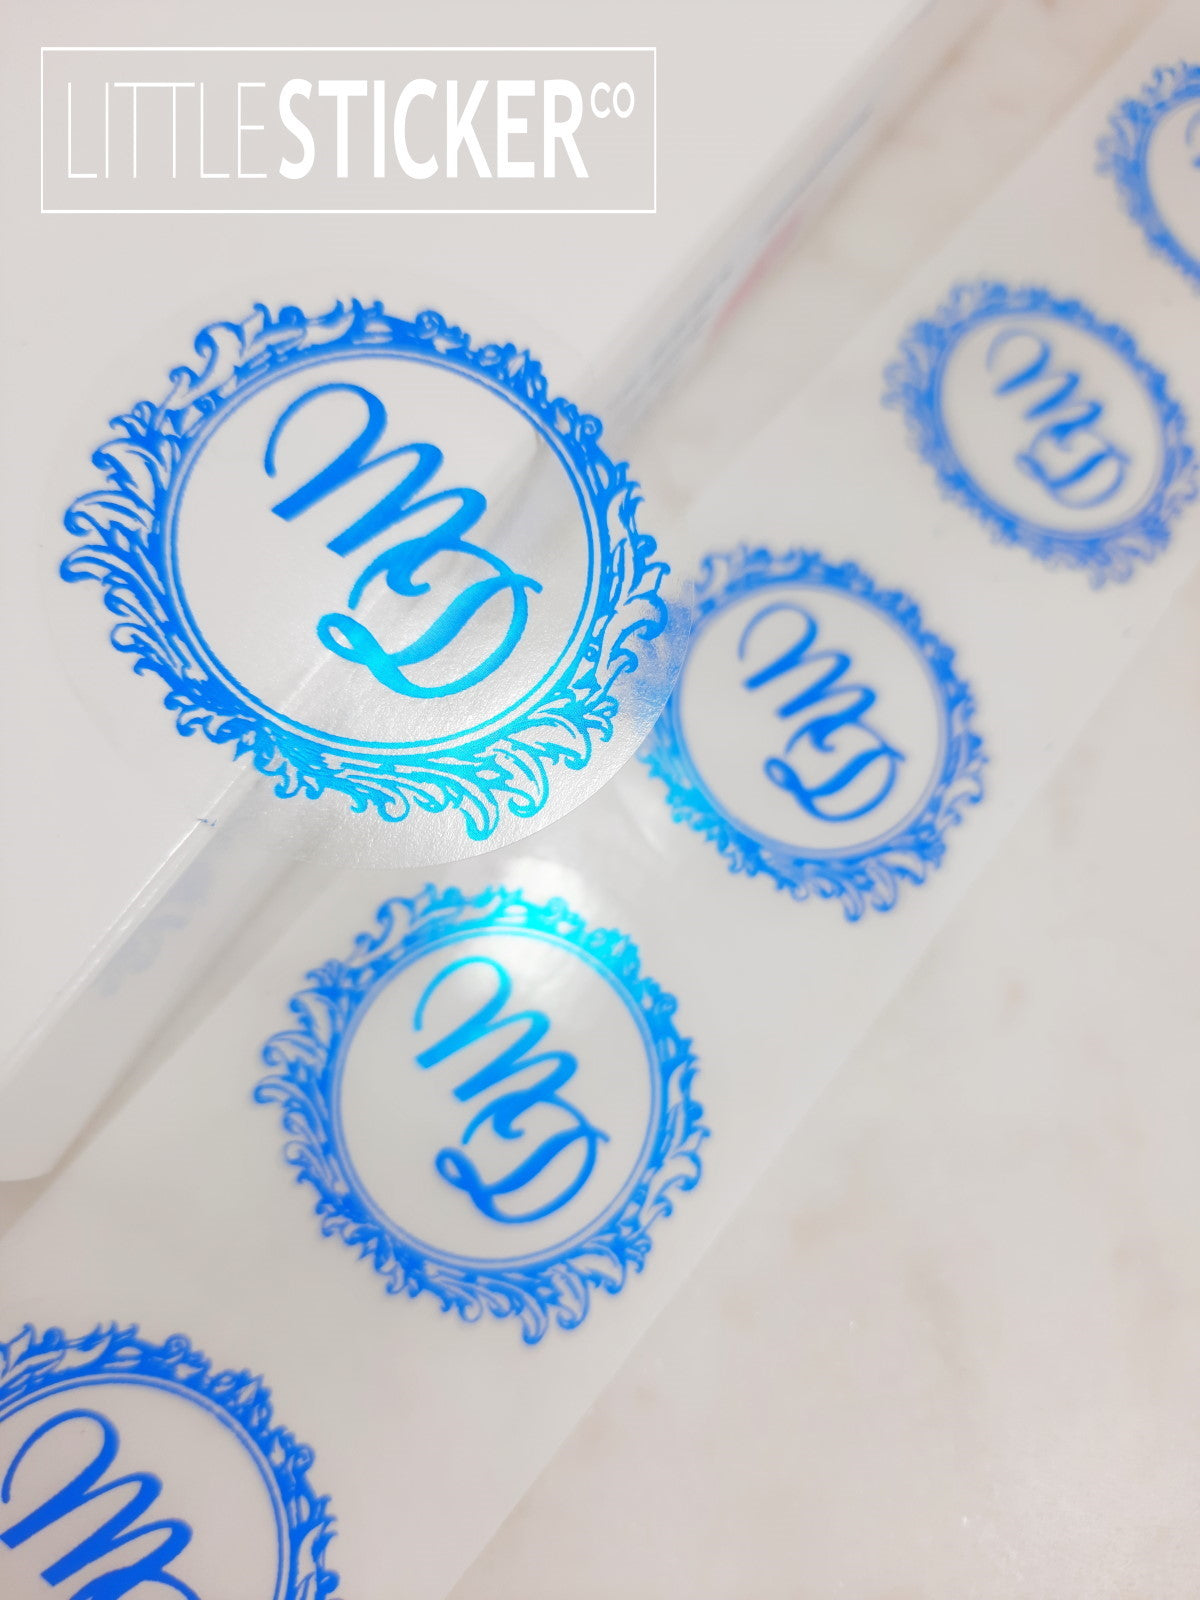 Initials, Monogram stickers. Boroque style design, personalised with one or two initials. Choose colour and size!